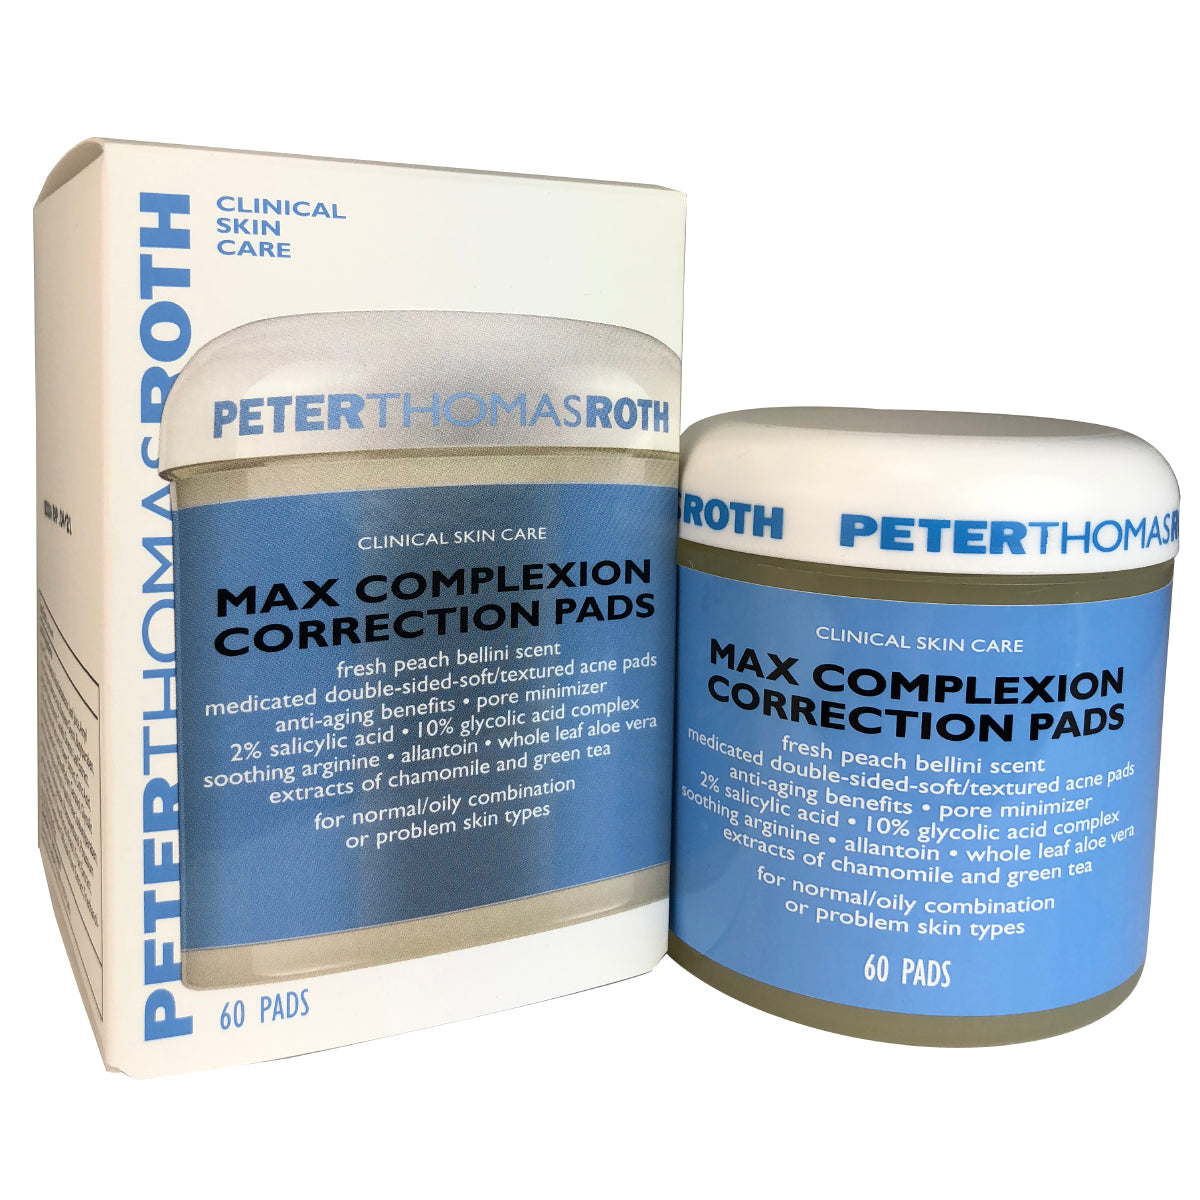 Peter Thomas Roth Complexion Correction Pads 60 Pads